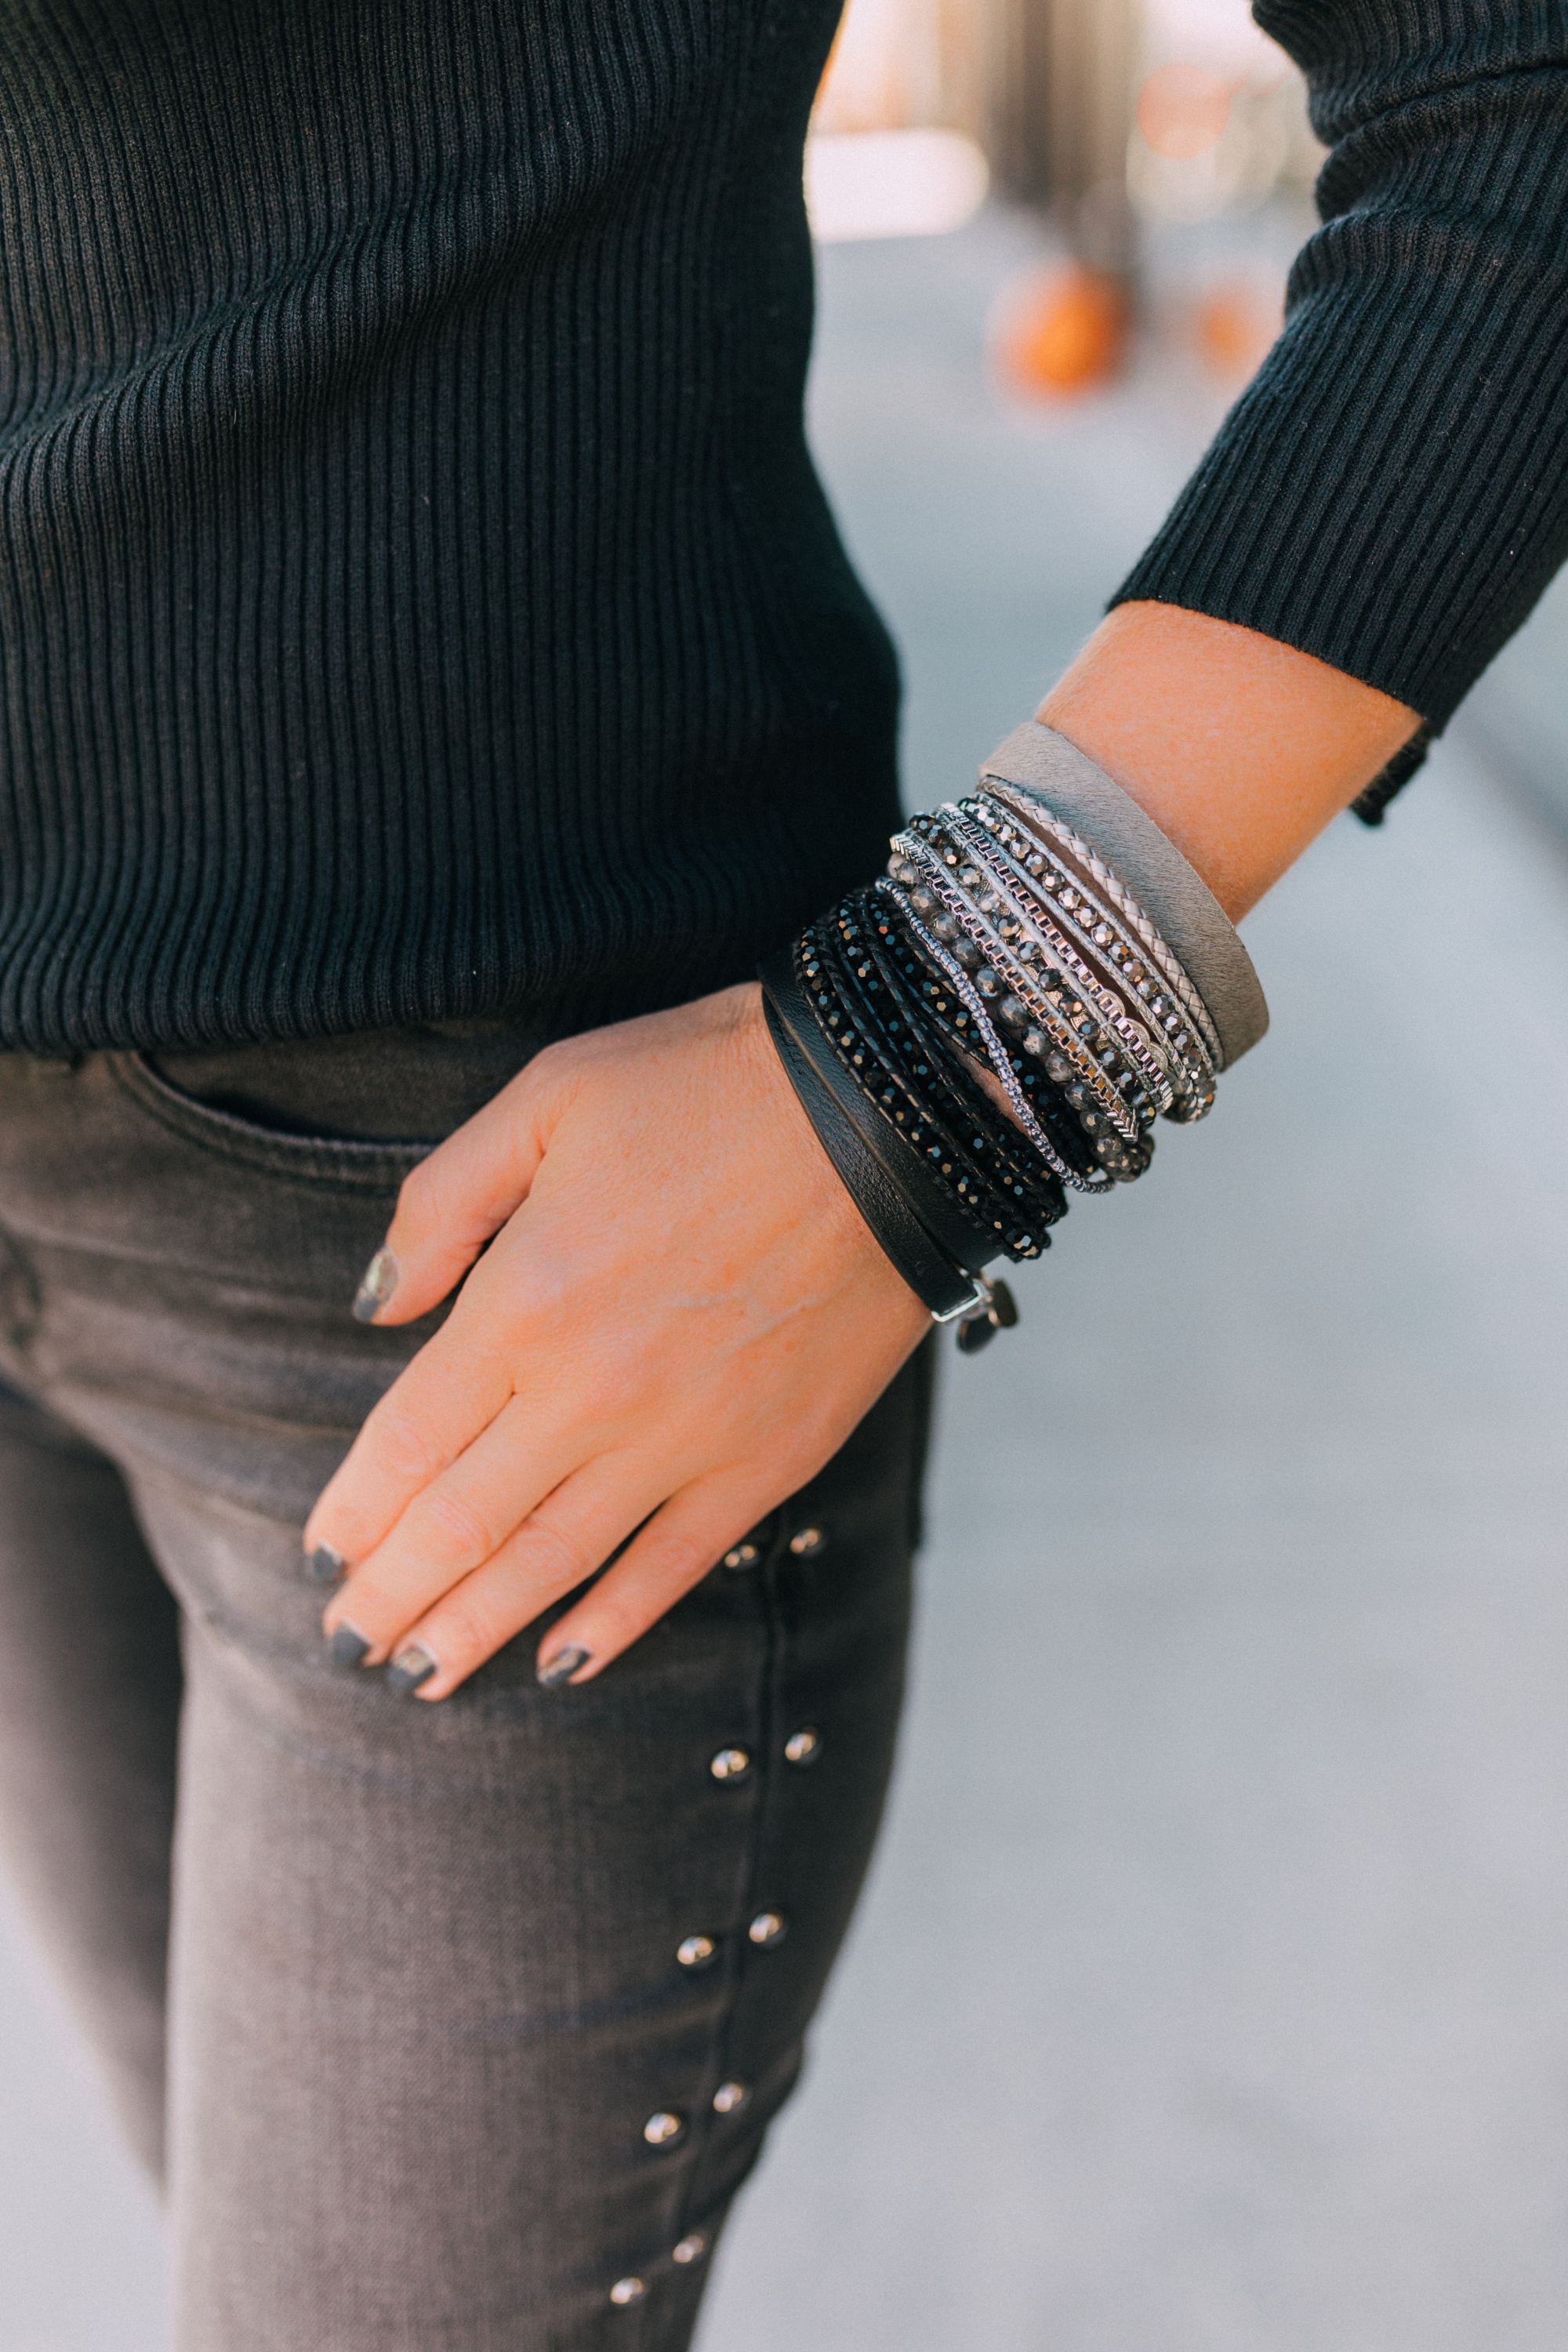 Warp Bracelets, Fashion blogger Erin Busbee of BusbeeStyle.com featuring the Mendoza, Midnight Mist, and Double Wrap bracelets by Victoria Emerson on Telluride, CO while wearing black pumps by Jimmy Choo, black studded jeans by Scoop from Walmart, and ribbed mock neck top